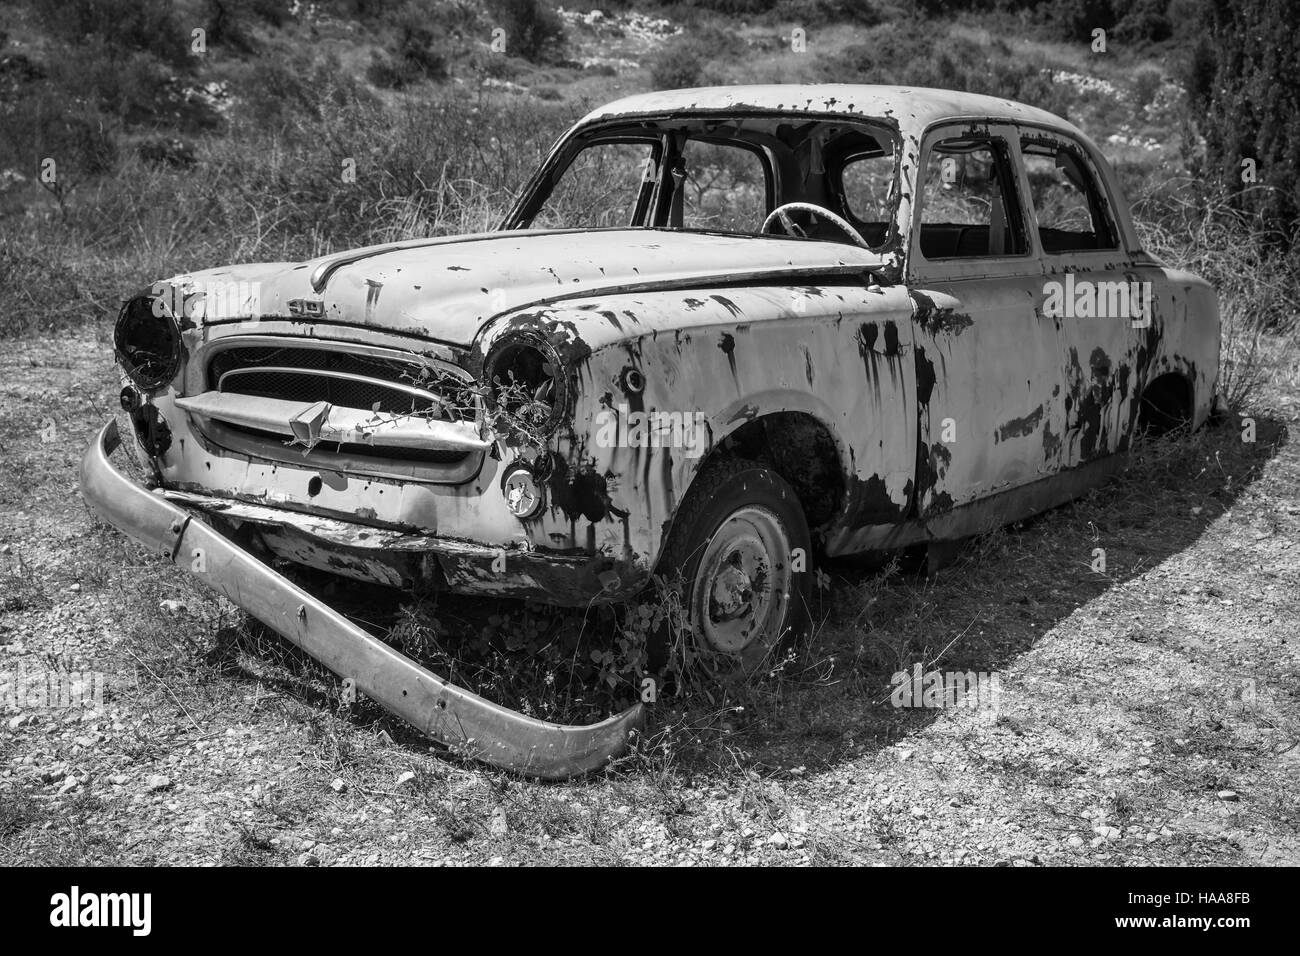 Zakynthos, Greece - August 20, 2016: Old abandoned rusted car stands in summer garden, black and white Stock Photo